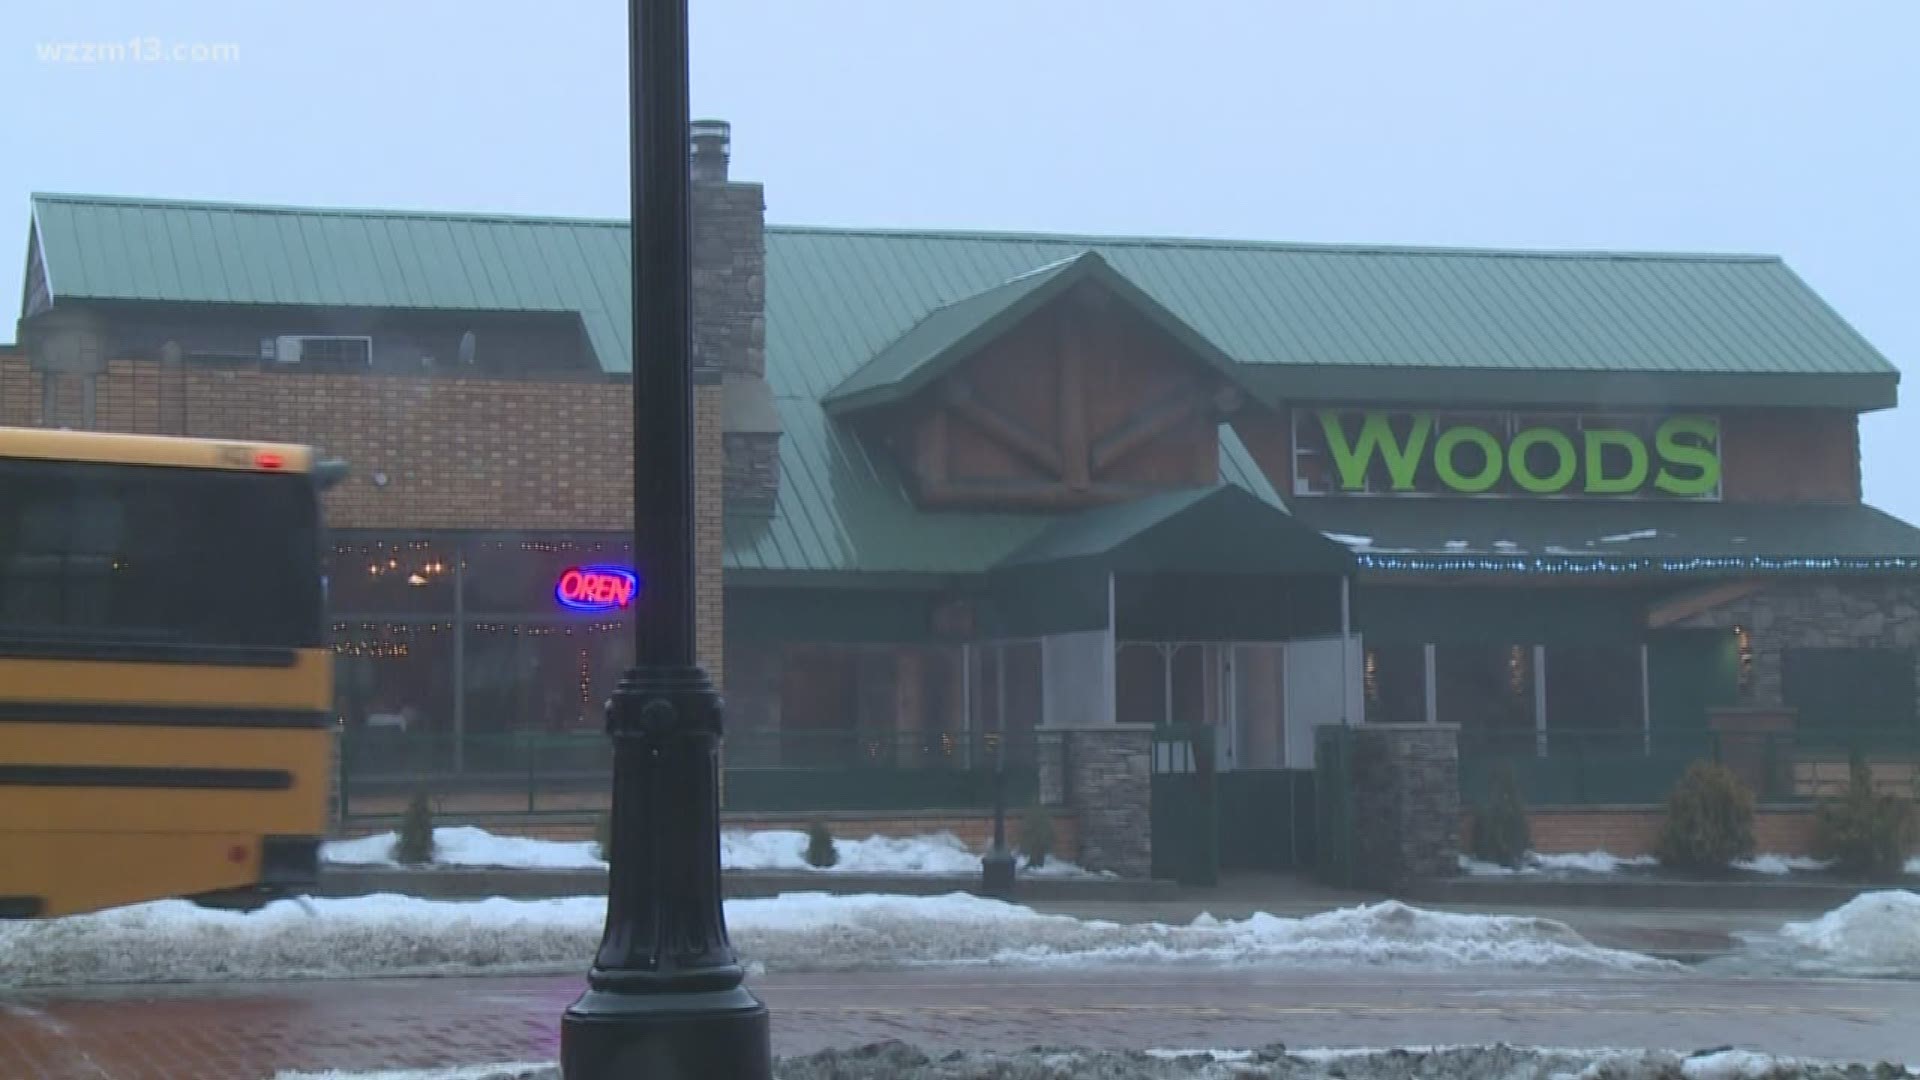 Federal lawsuit filed against The Grand Woods Lounge over employee wages